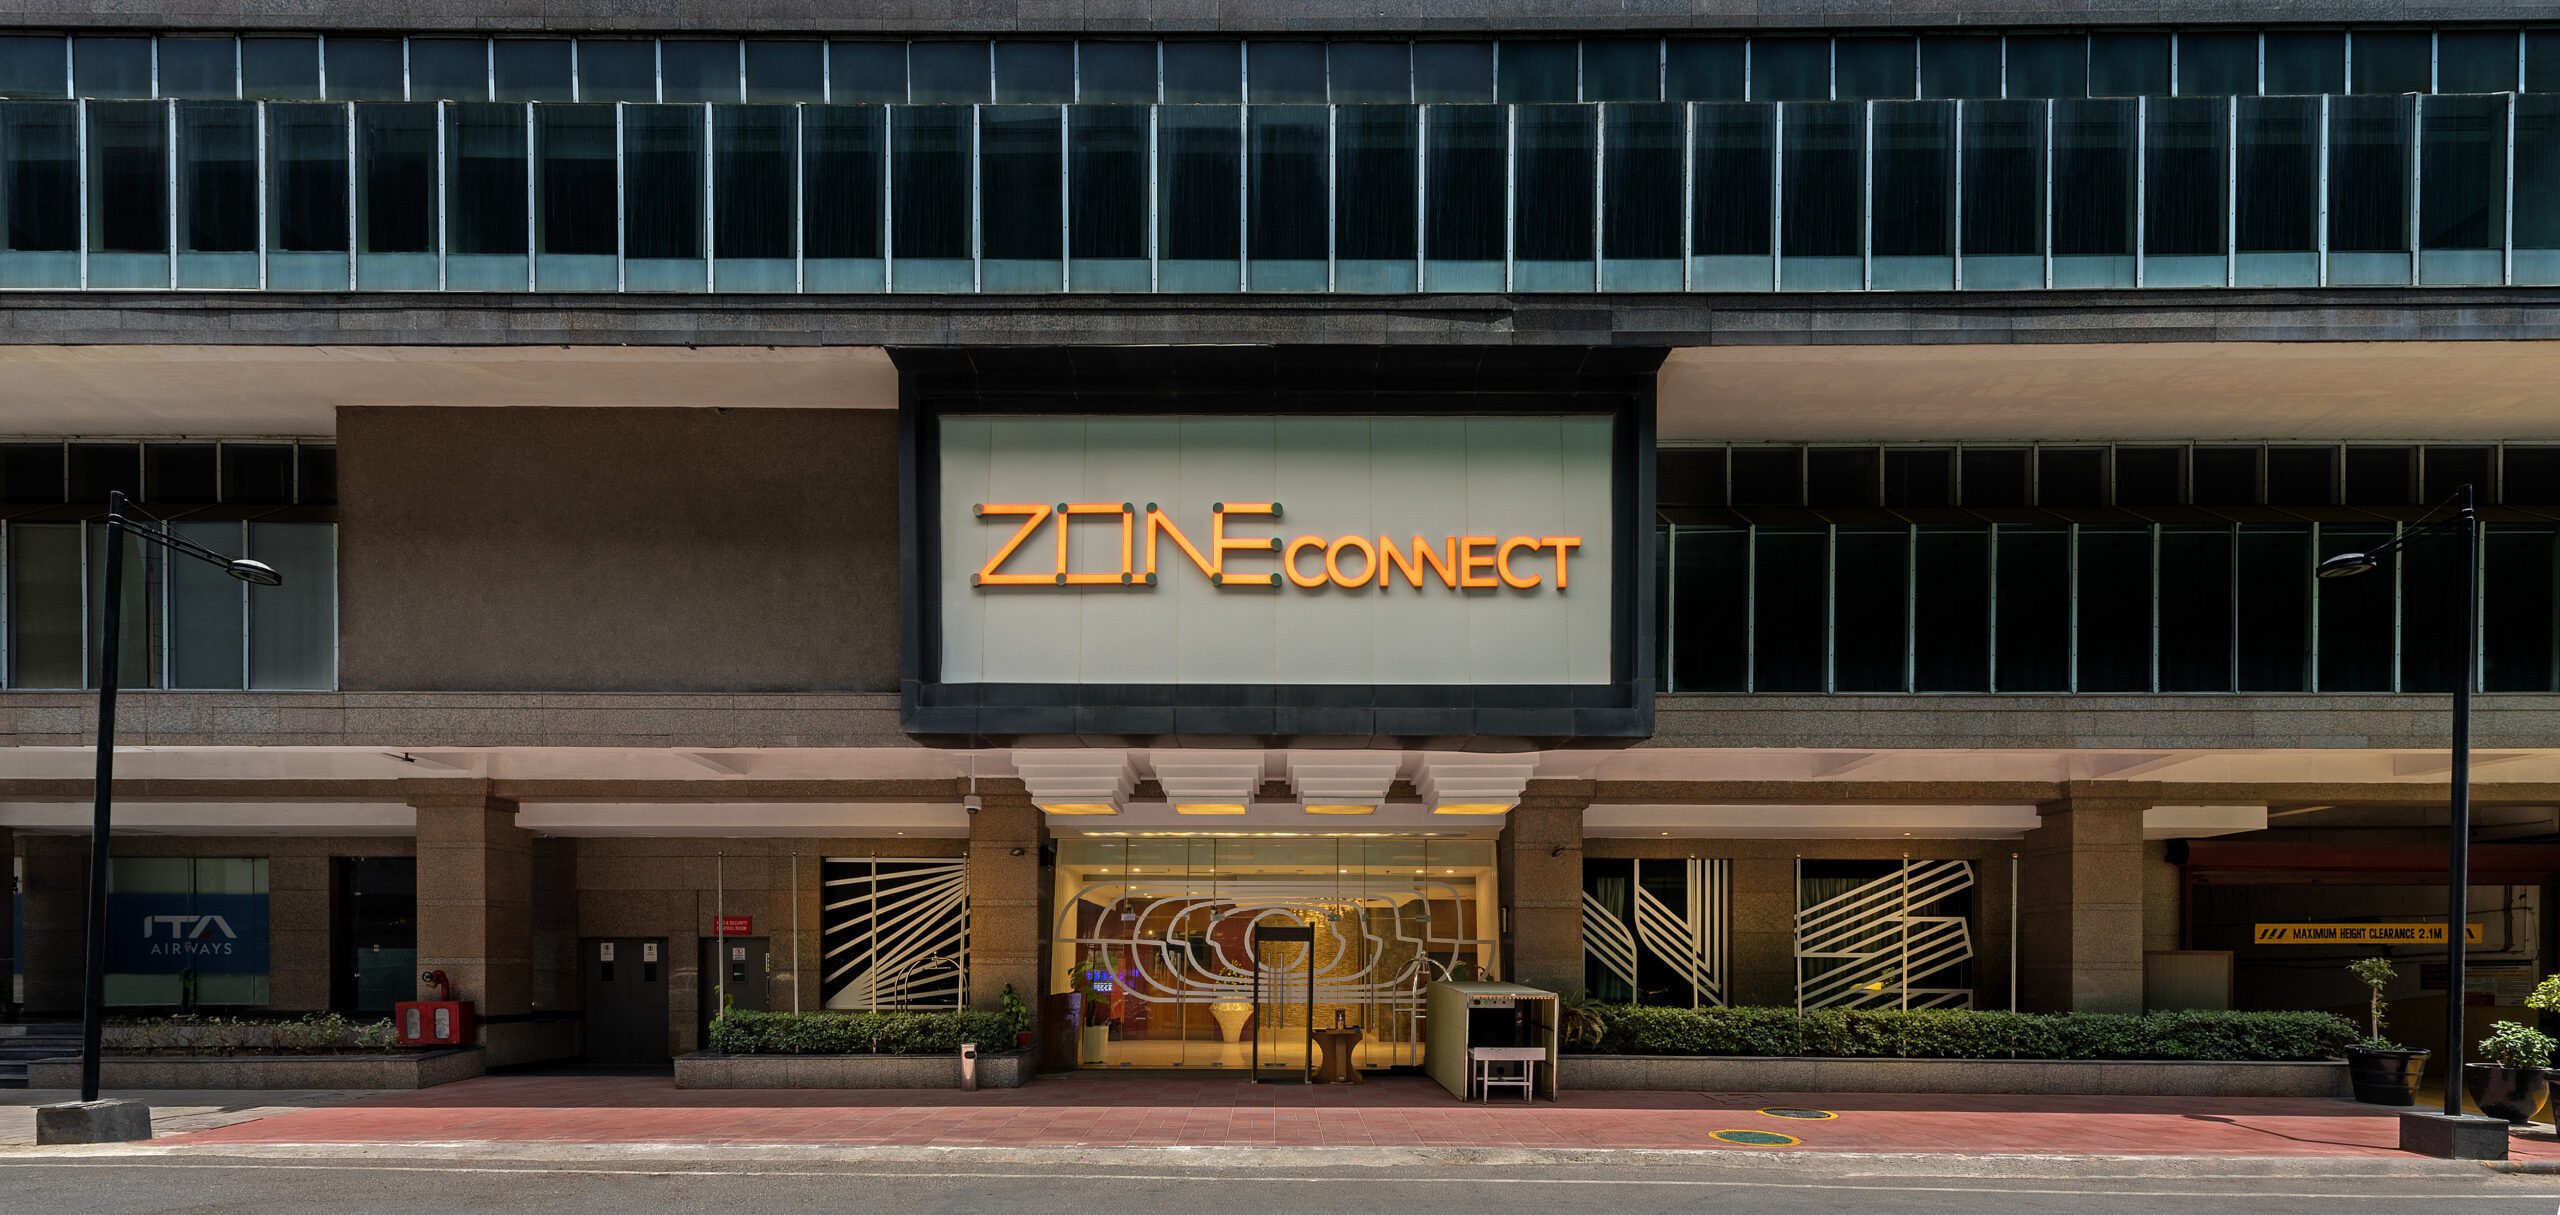 Apeejay Surrendra Park Hotels Opens New Zone Connect Hotel in Saket, New Delhi